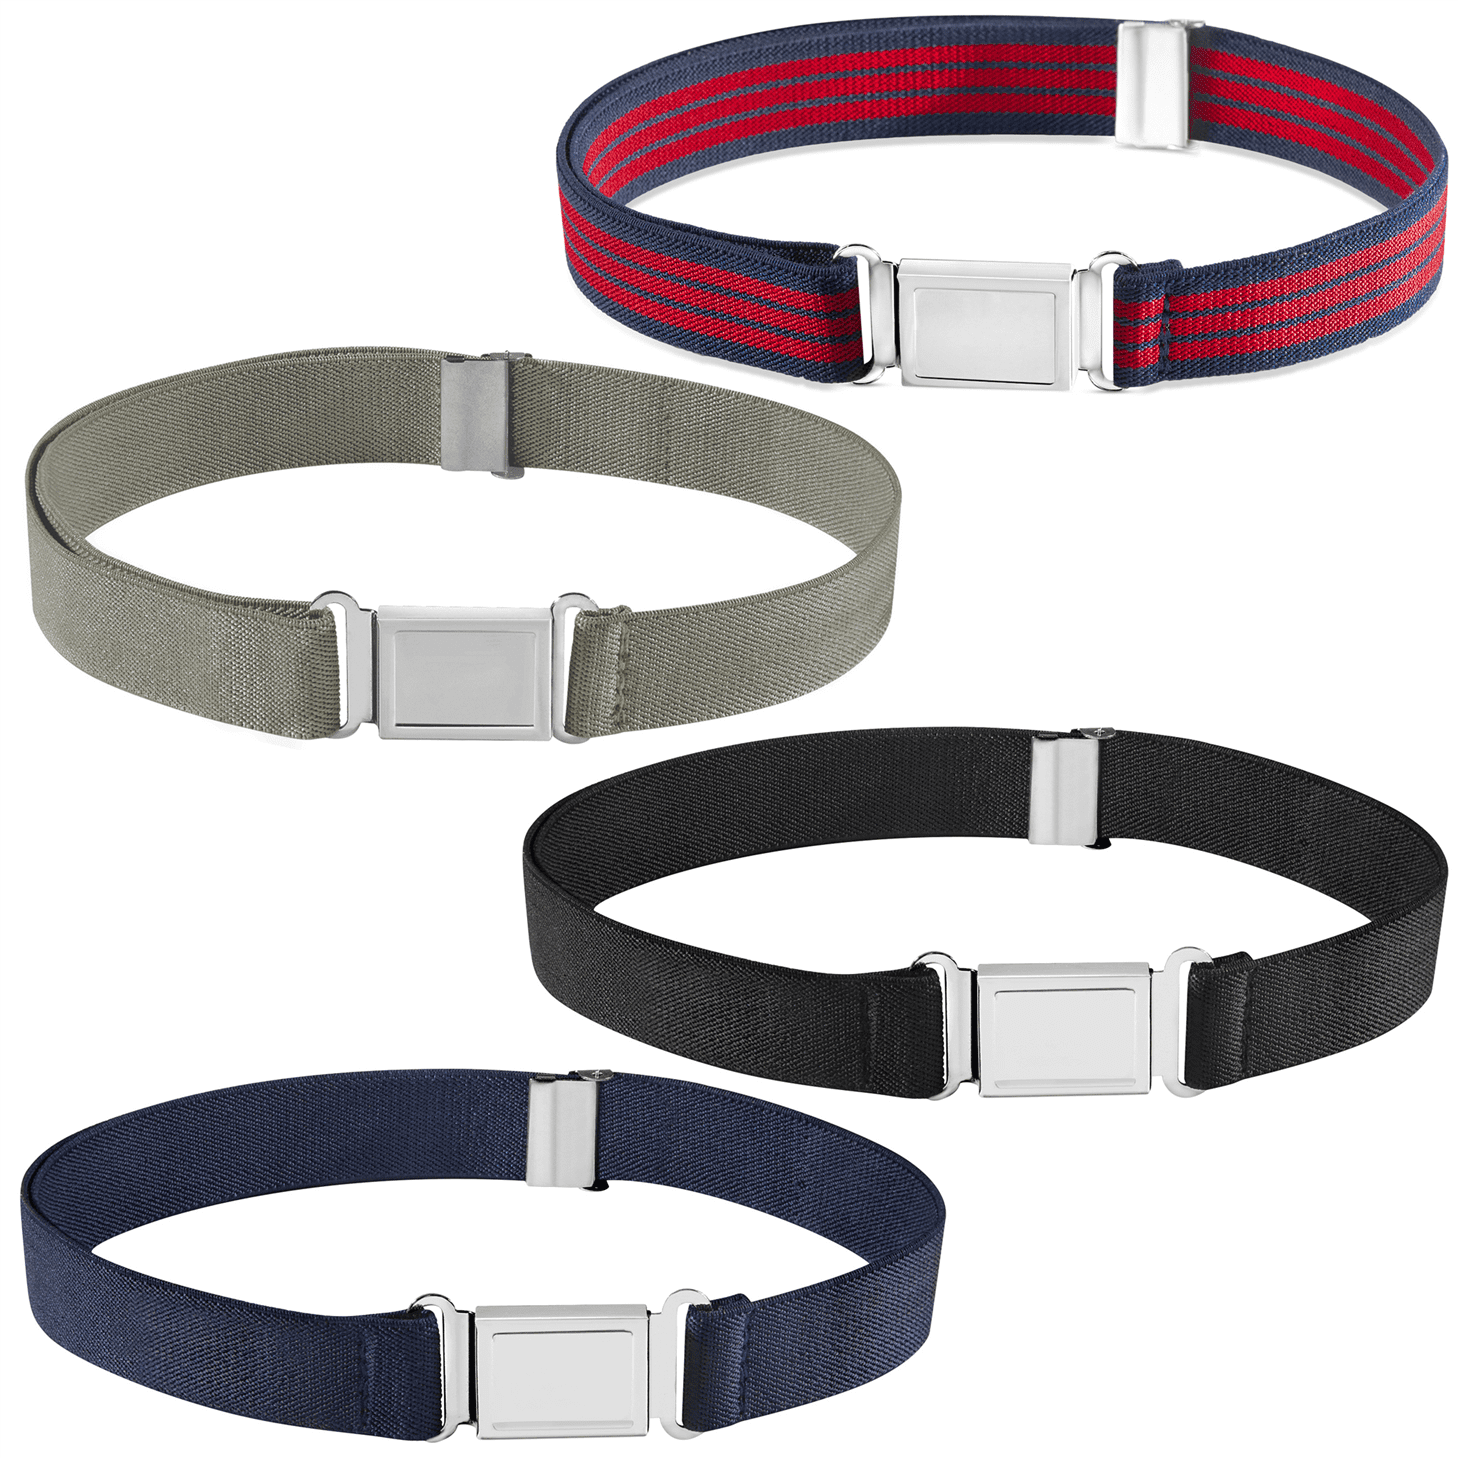 Buyless Fashion Kids Boys Toddler Adjustable Elastic Stretch Belt With Buckle 4 Pack